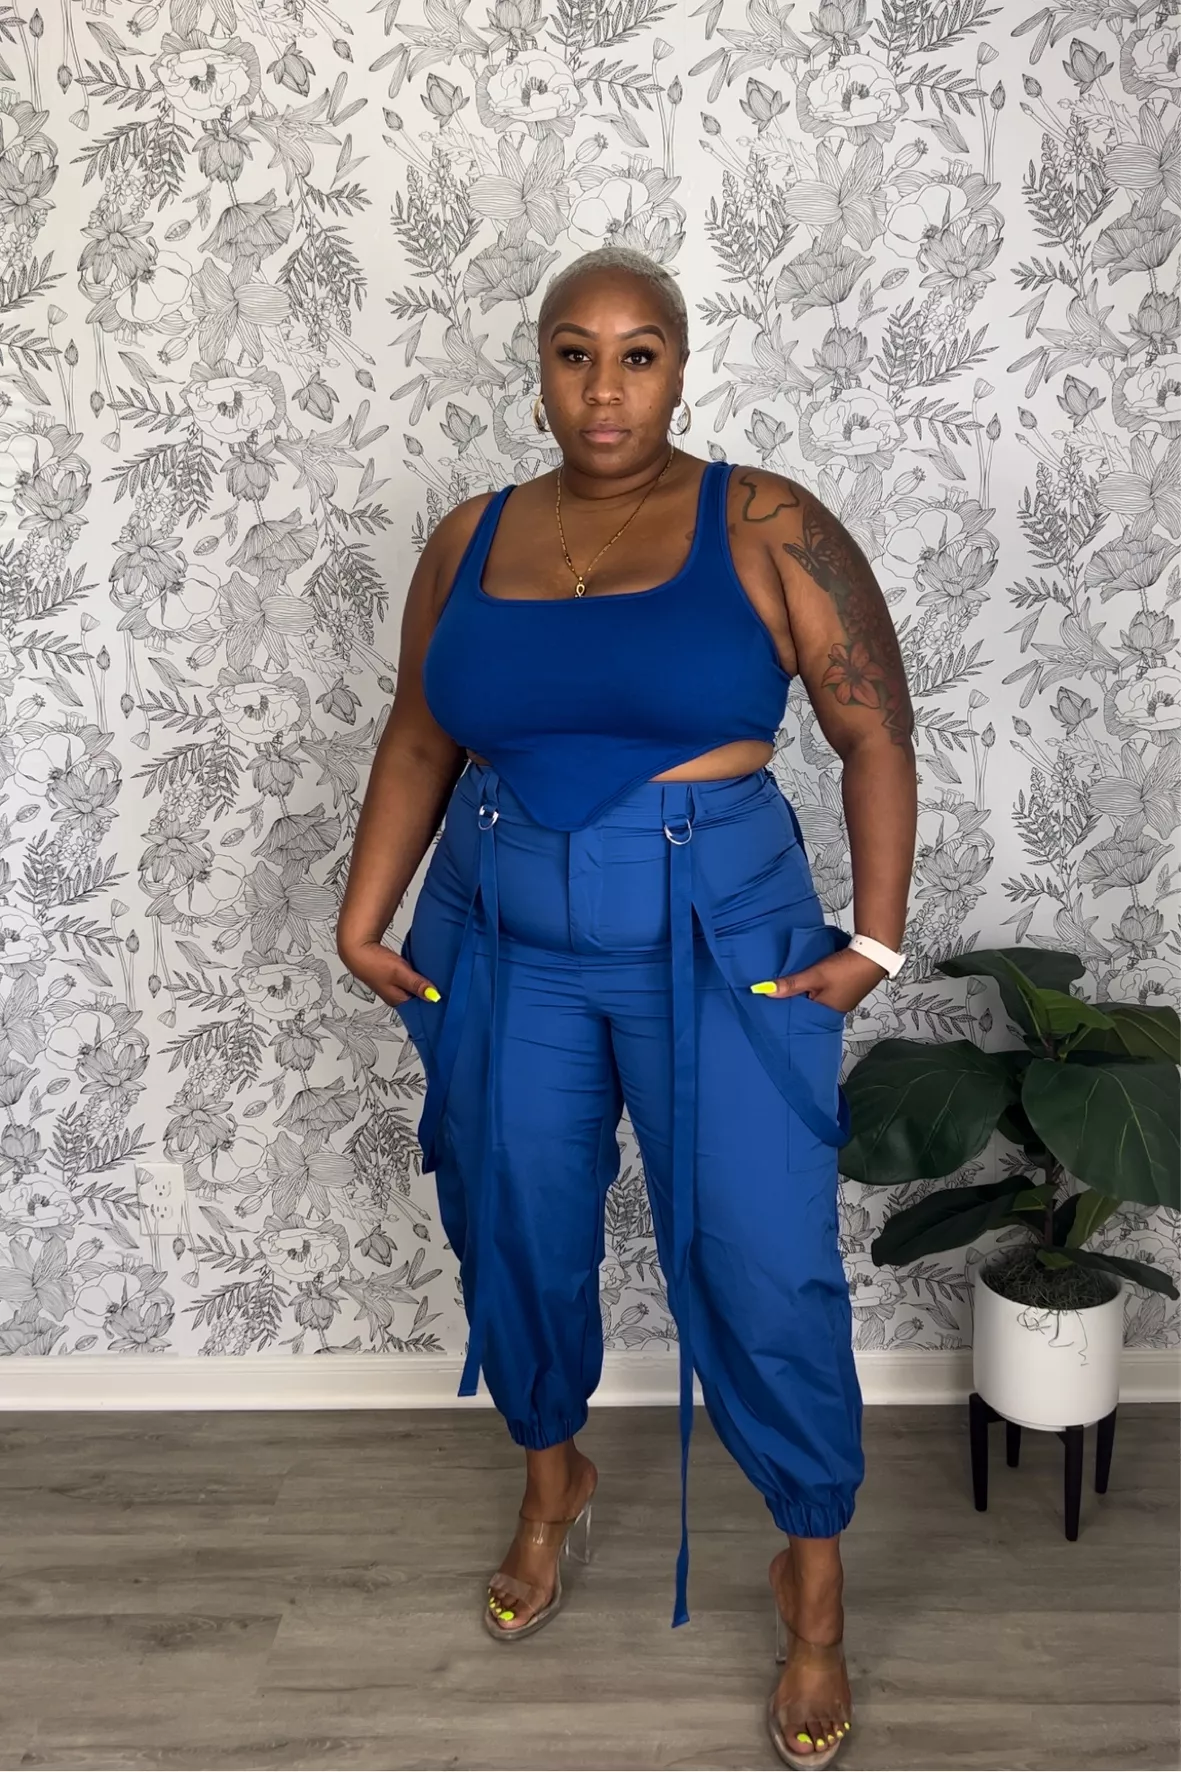 I'm plus-size – my favorite items from Shein's curve collection